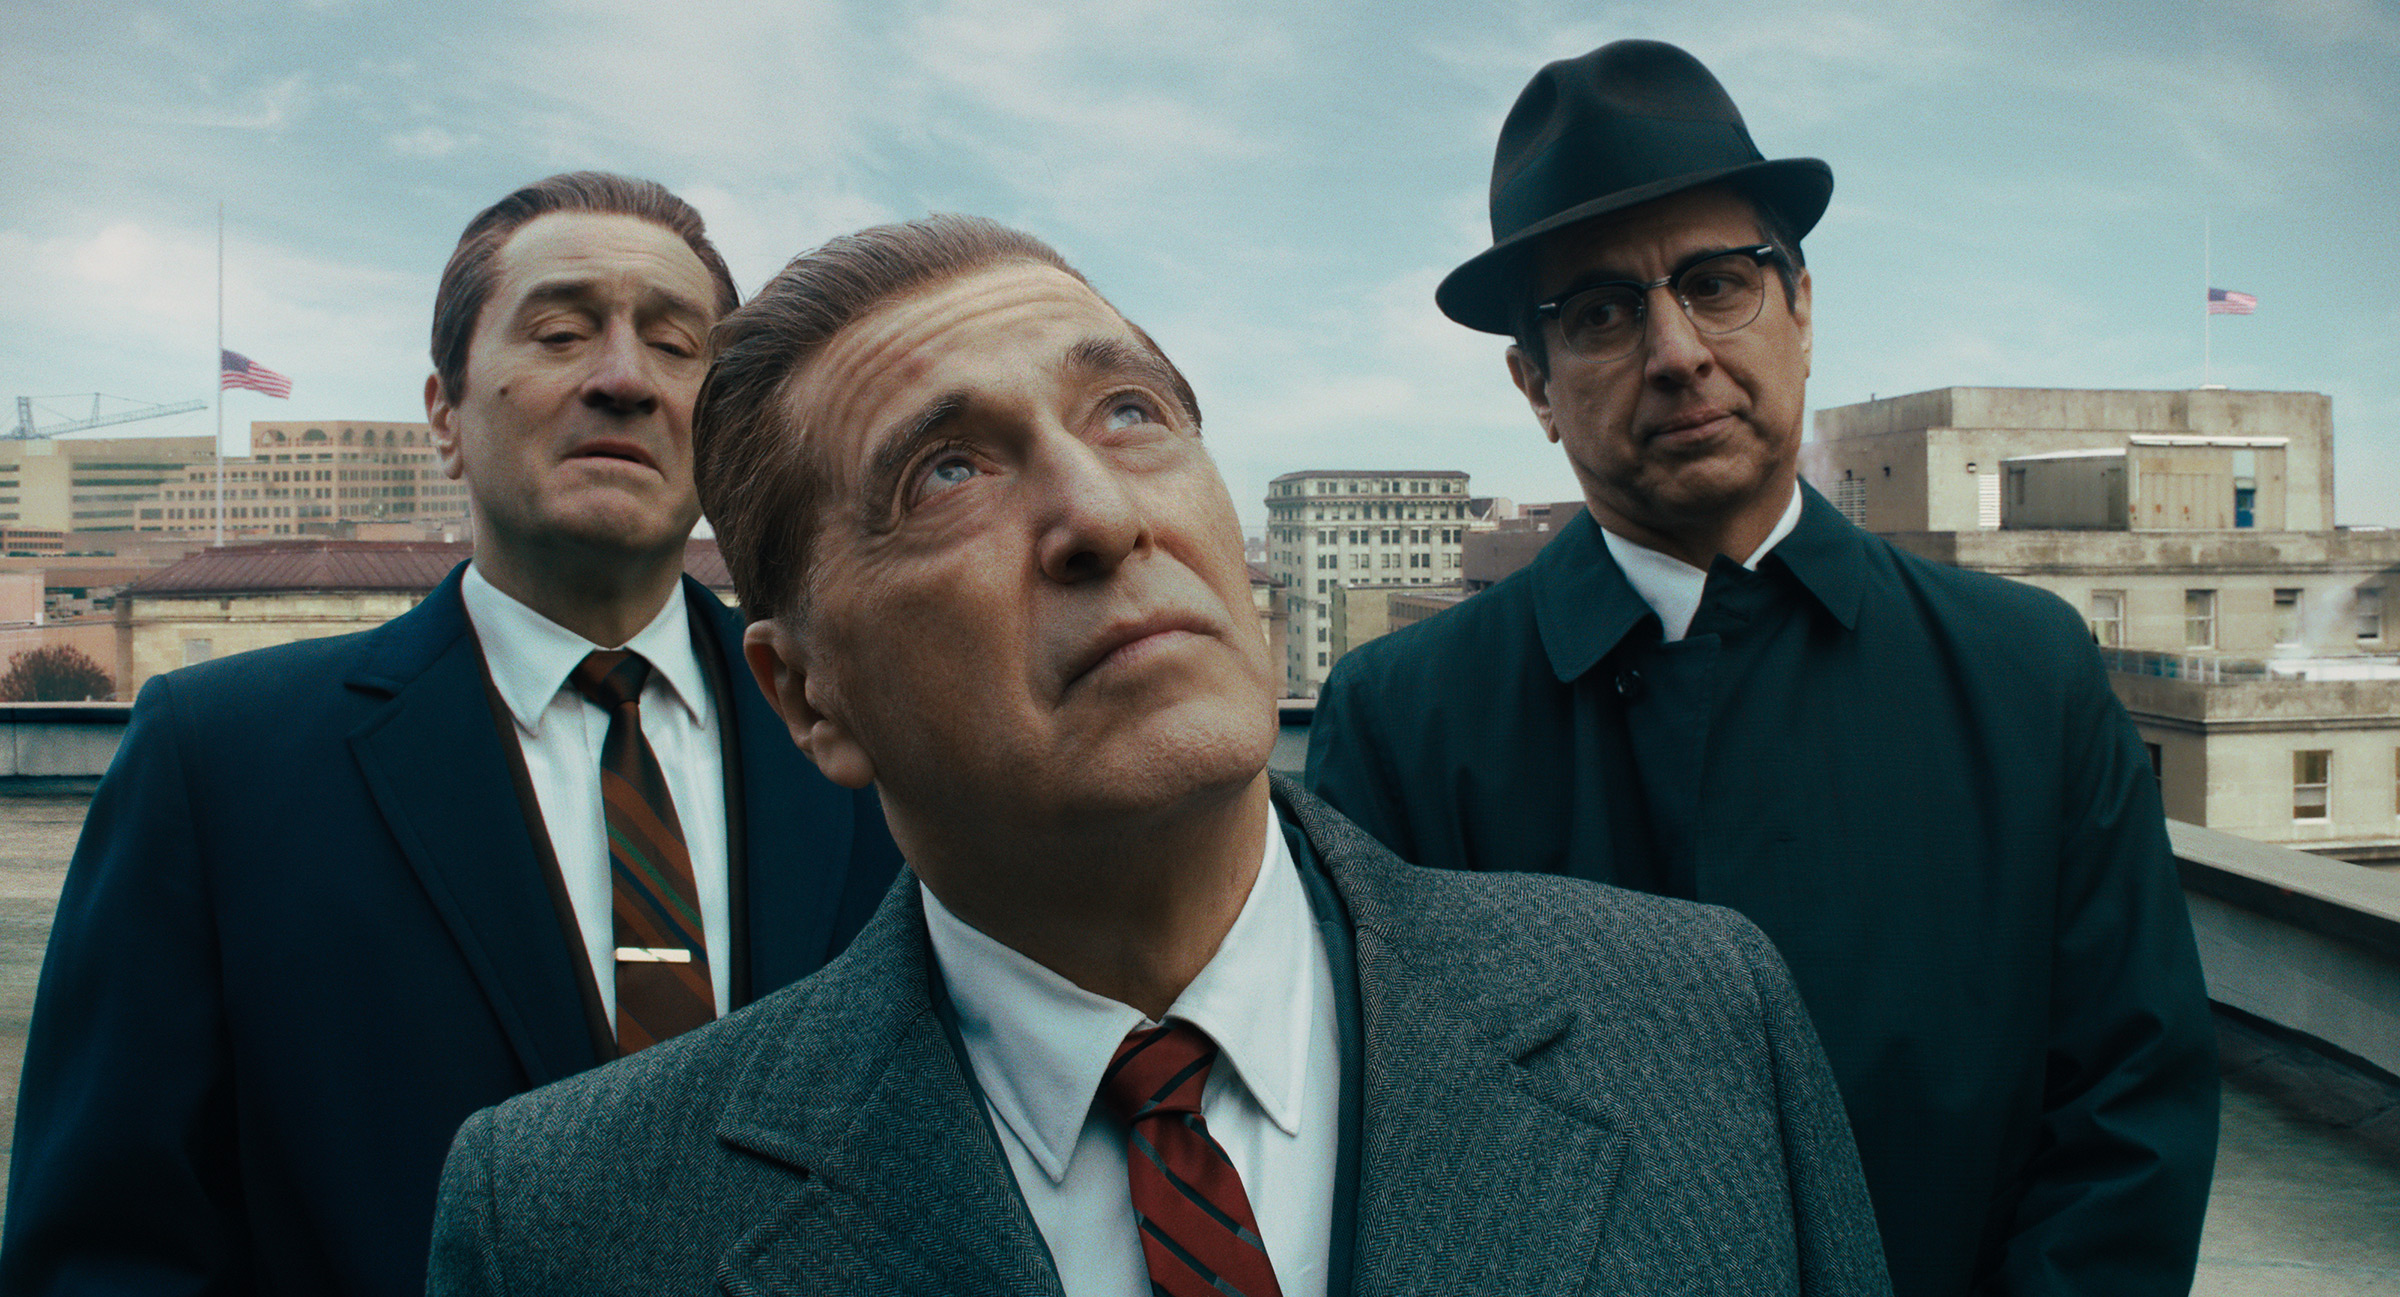 Martin Scorsese’s The Irishman, his 3½-hour epic Mob movie for Netflix, received 10 nominations